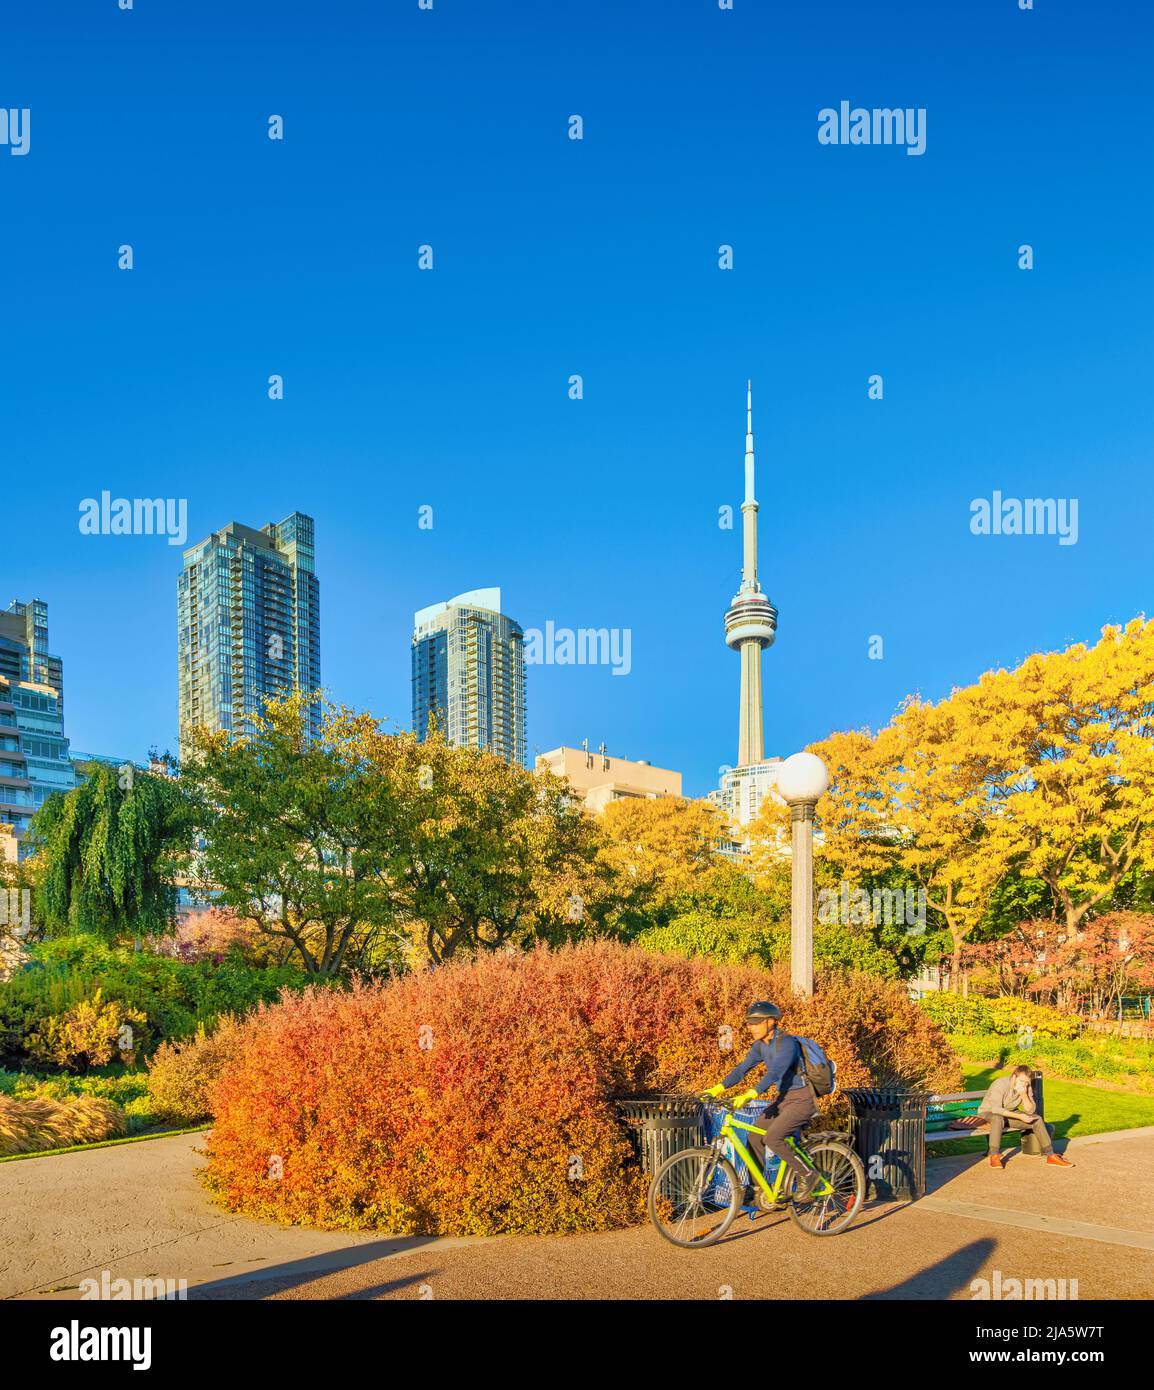 Man cycles on the Harbourfront in downtown Toronto, Ontario, Canada on an autumn day. Stock Photo